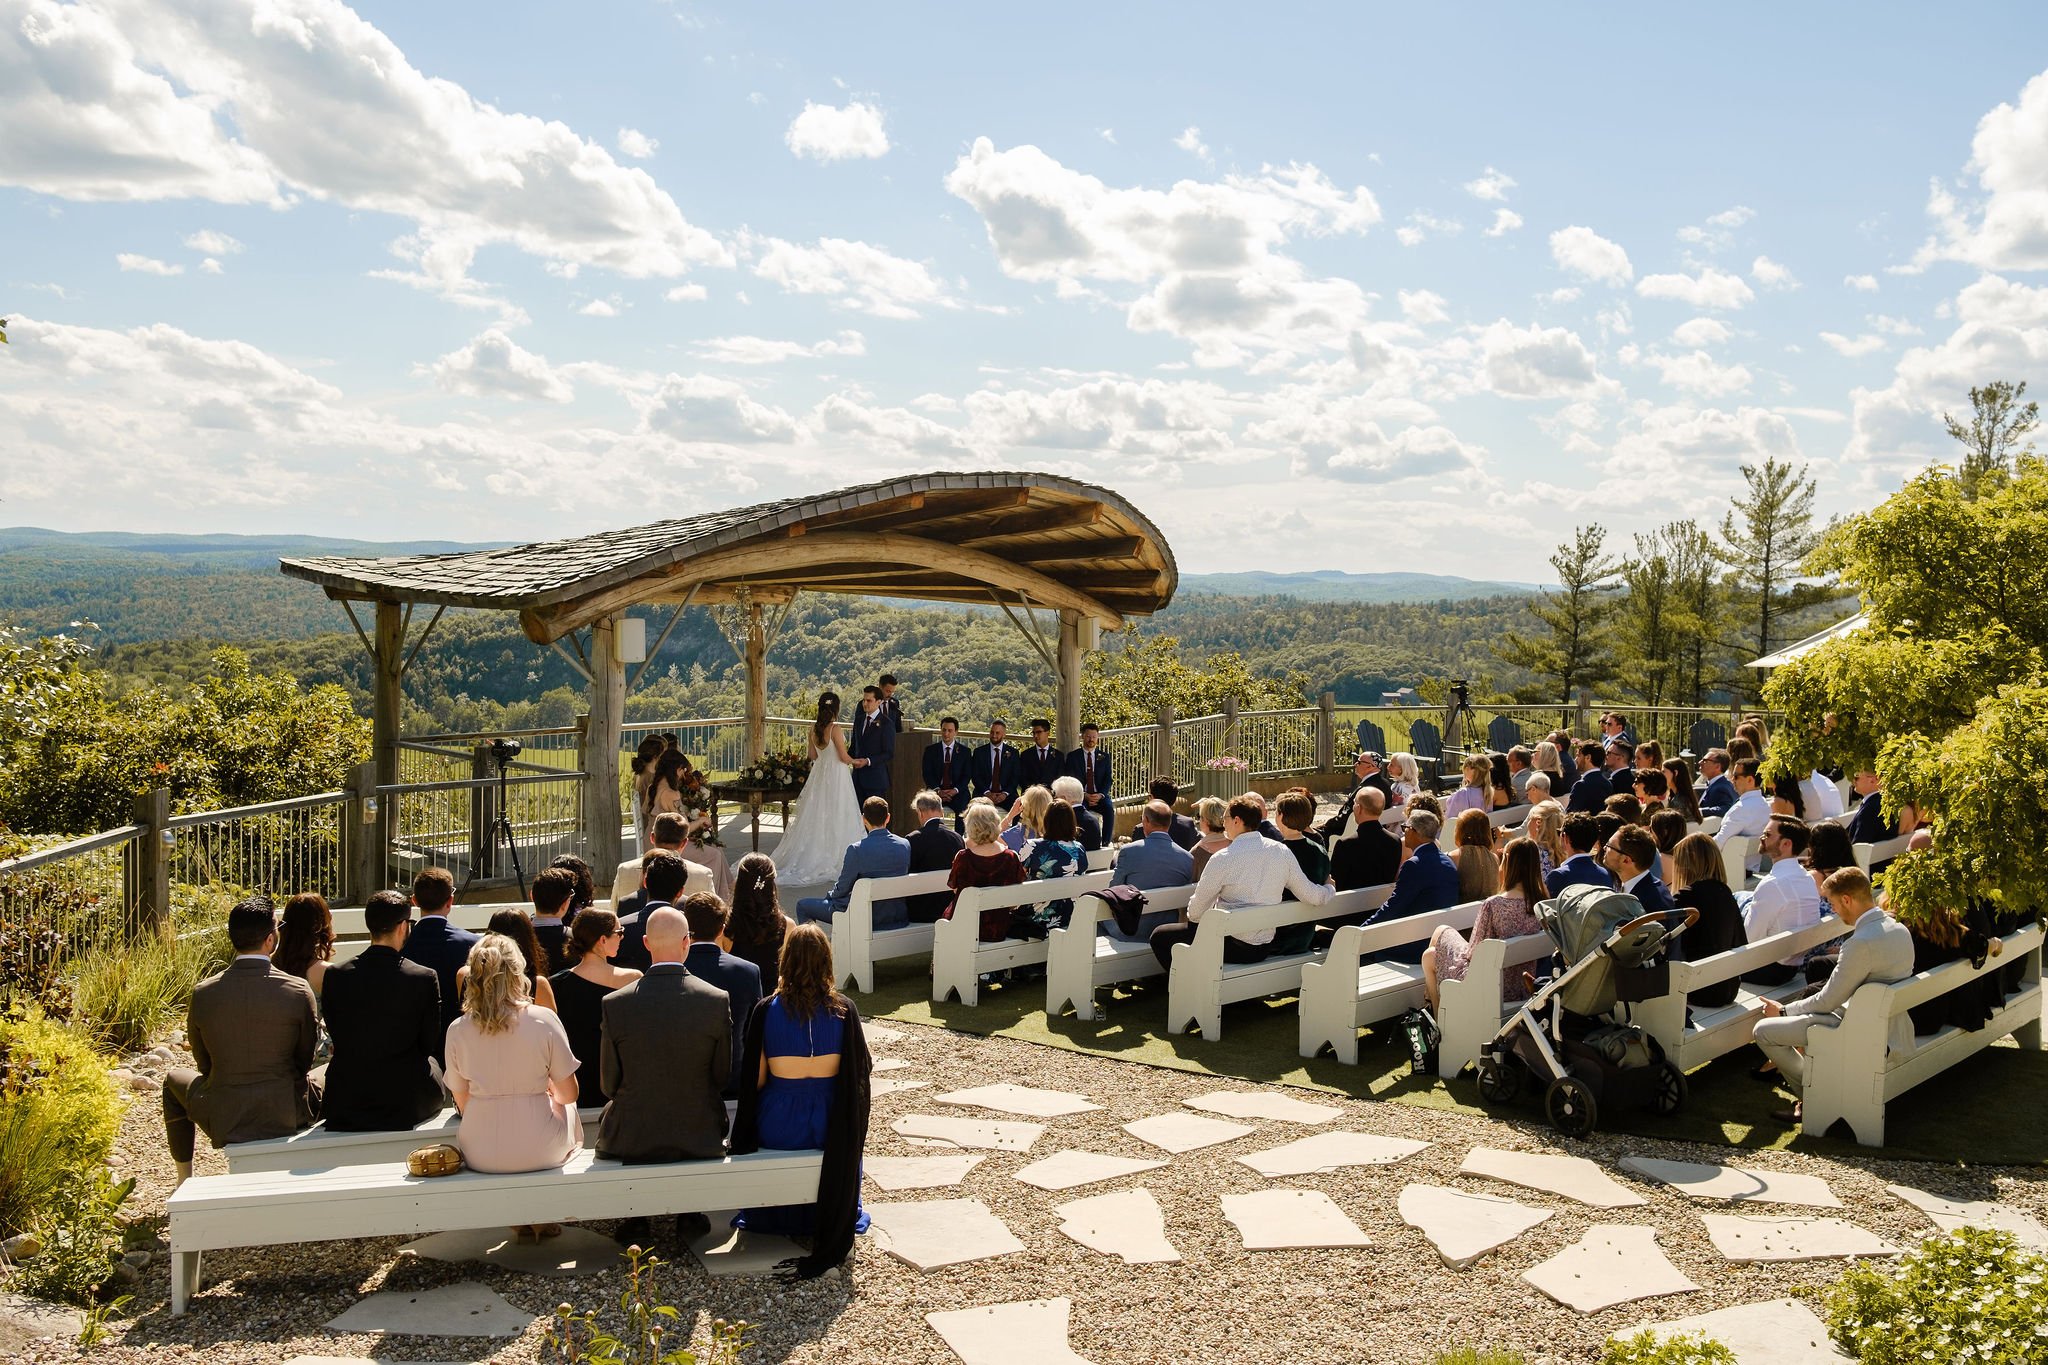  wide angle photo of a le belvedere wedding ceremony 